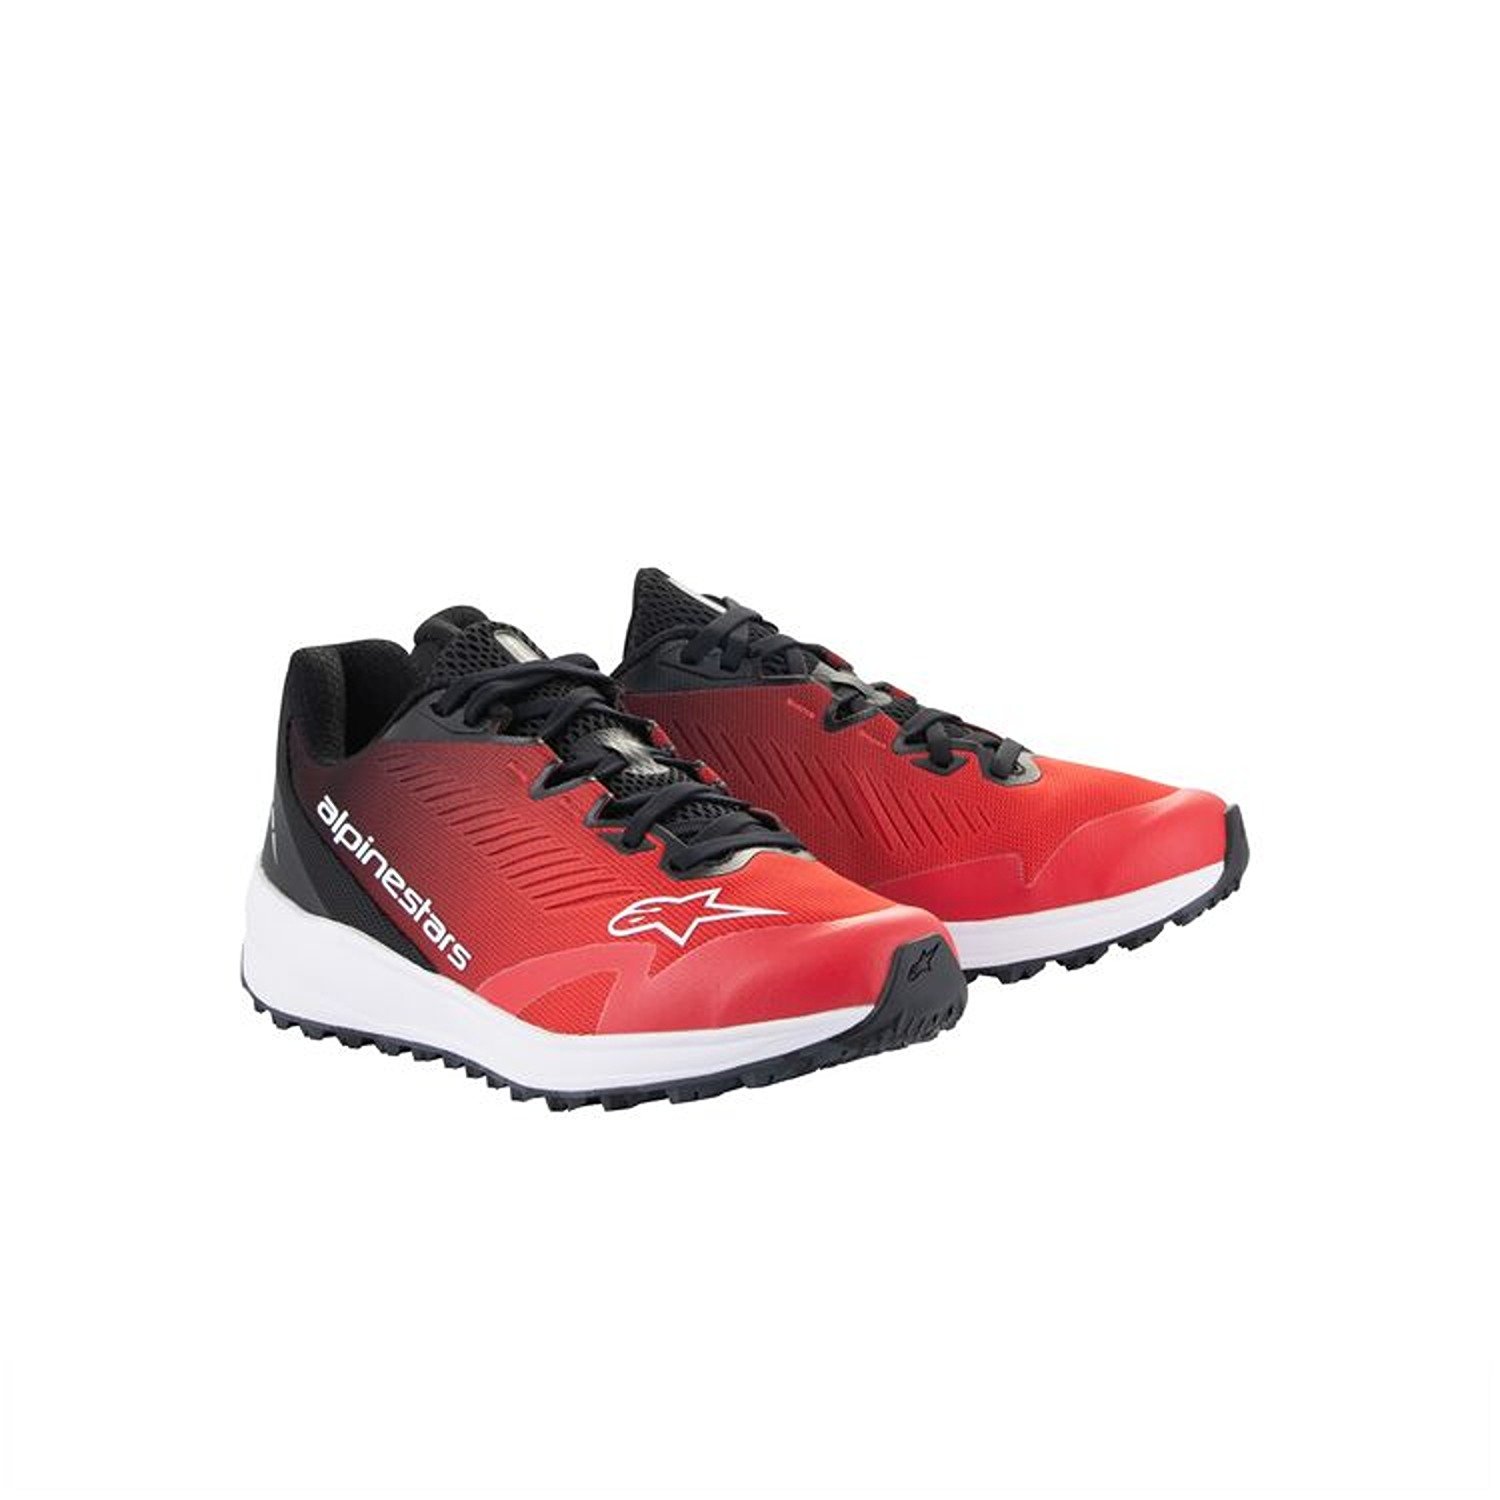 Image of Alpinestars Meta Road V2 Shoes Red Black White Taille US 85